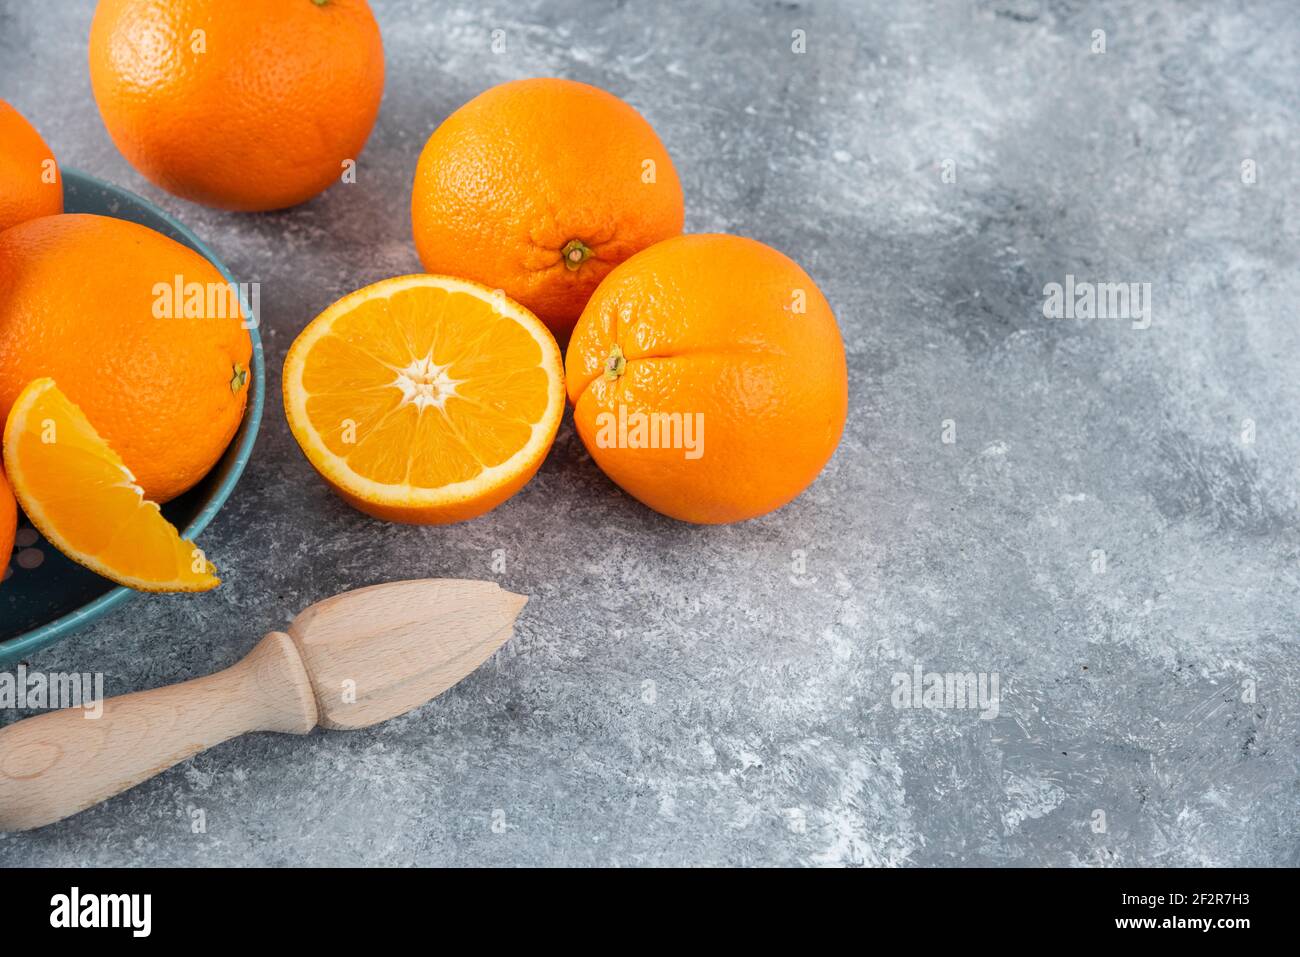 A bowl full of sliced and whole juicy orange fruits with wooden reamer Stock Photo